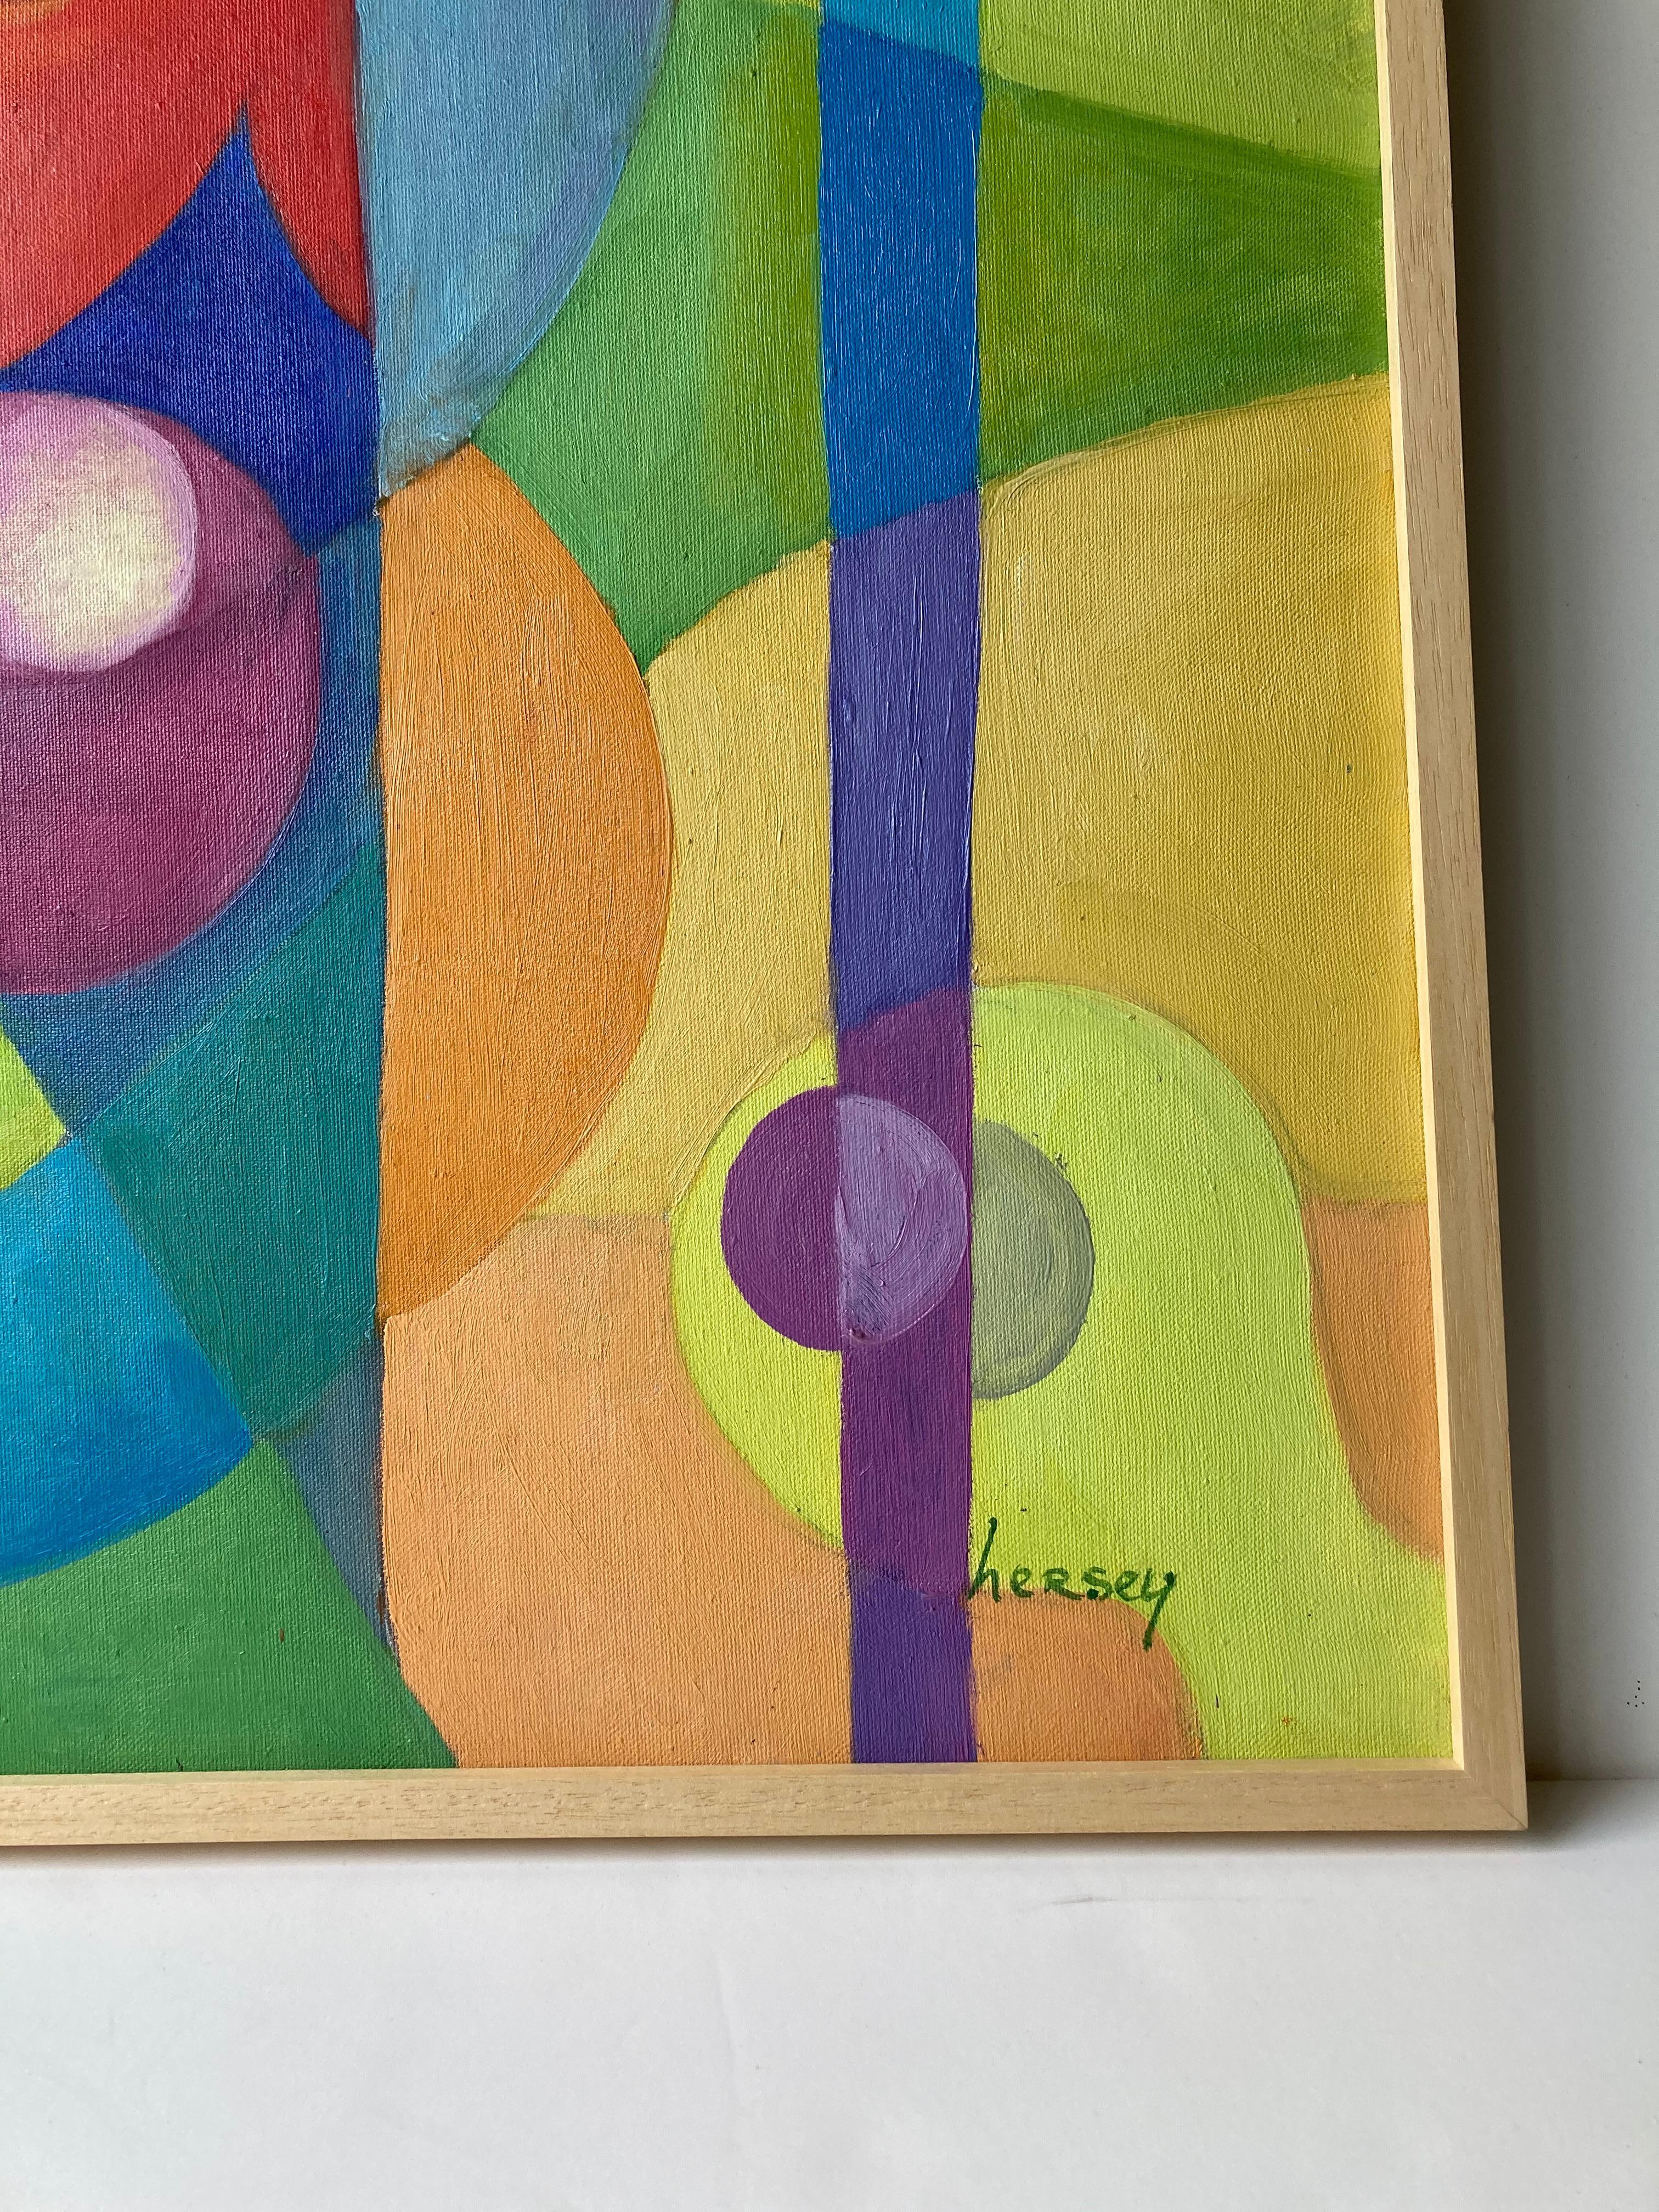 Nice and large Dick Hersey geometric oil painting, title Circus 1. Label in back. Framed. Signed LR. This painting was created somewhere circa 1970s-1980s. New frame.